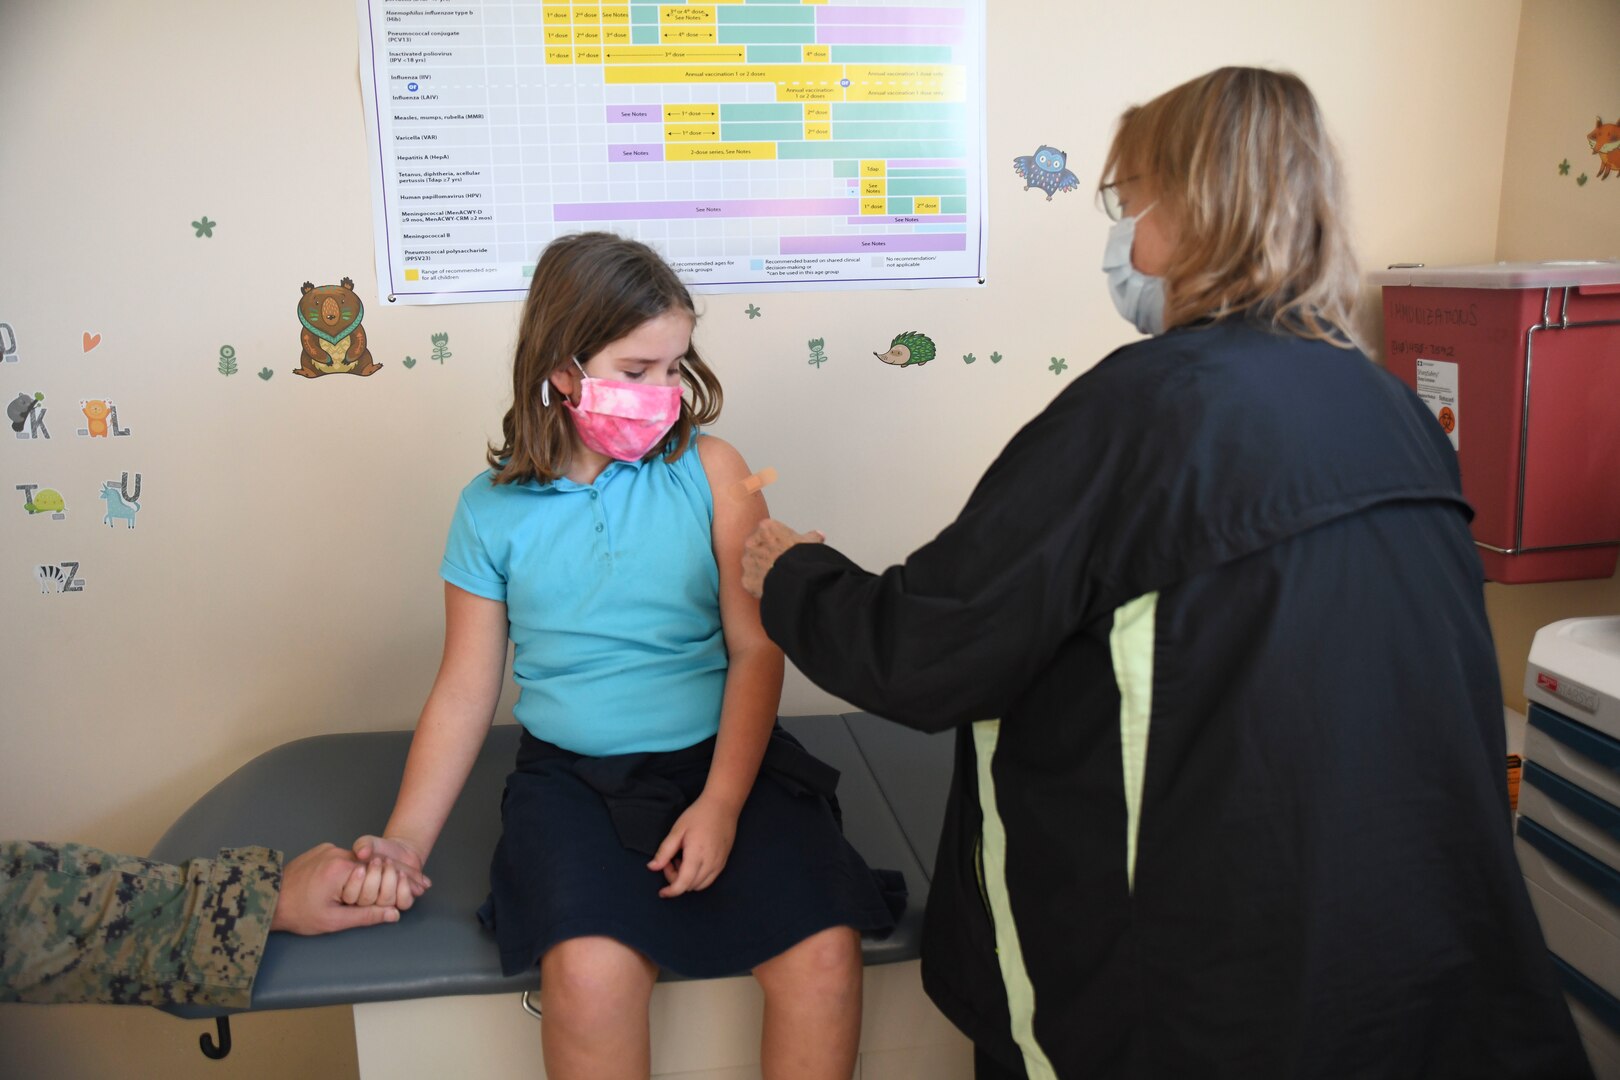 NMCCL began administering the Pfizer-BioNTech COVID-19 Vaccine to pediatric beneficiaries ages 5-11 years old on November 17, 2021.